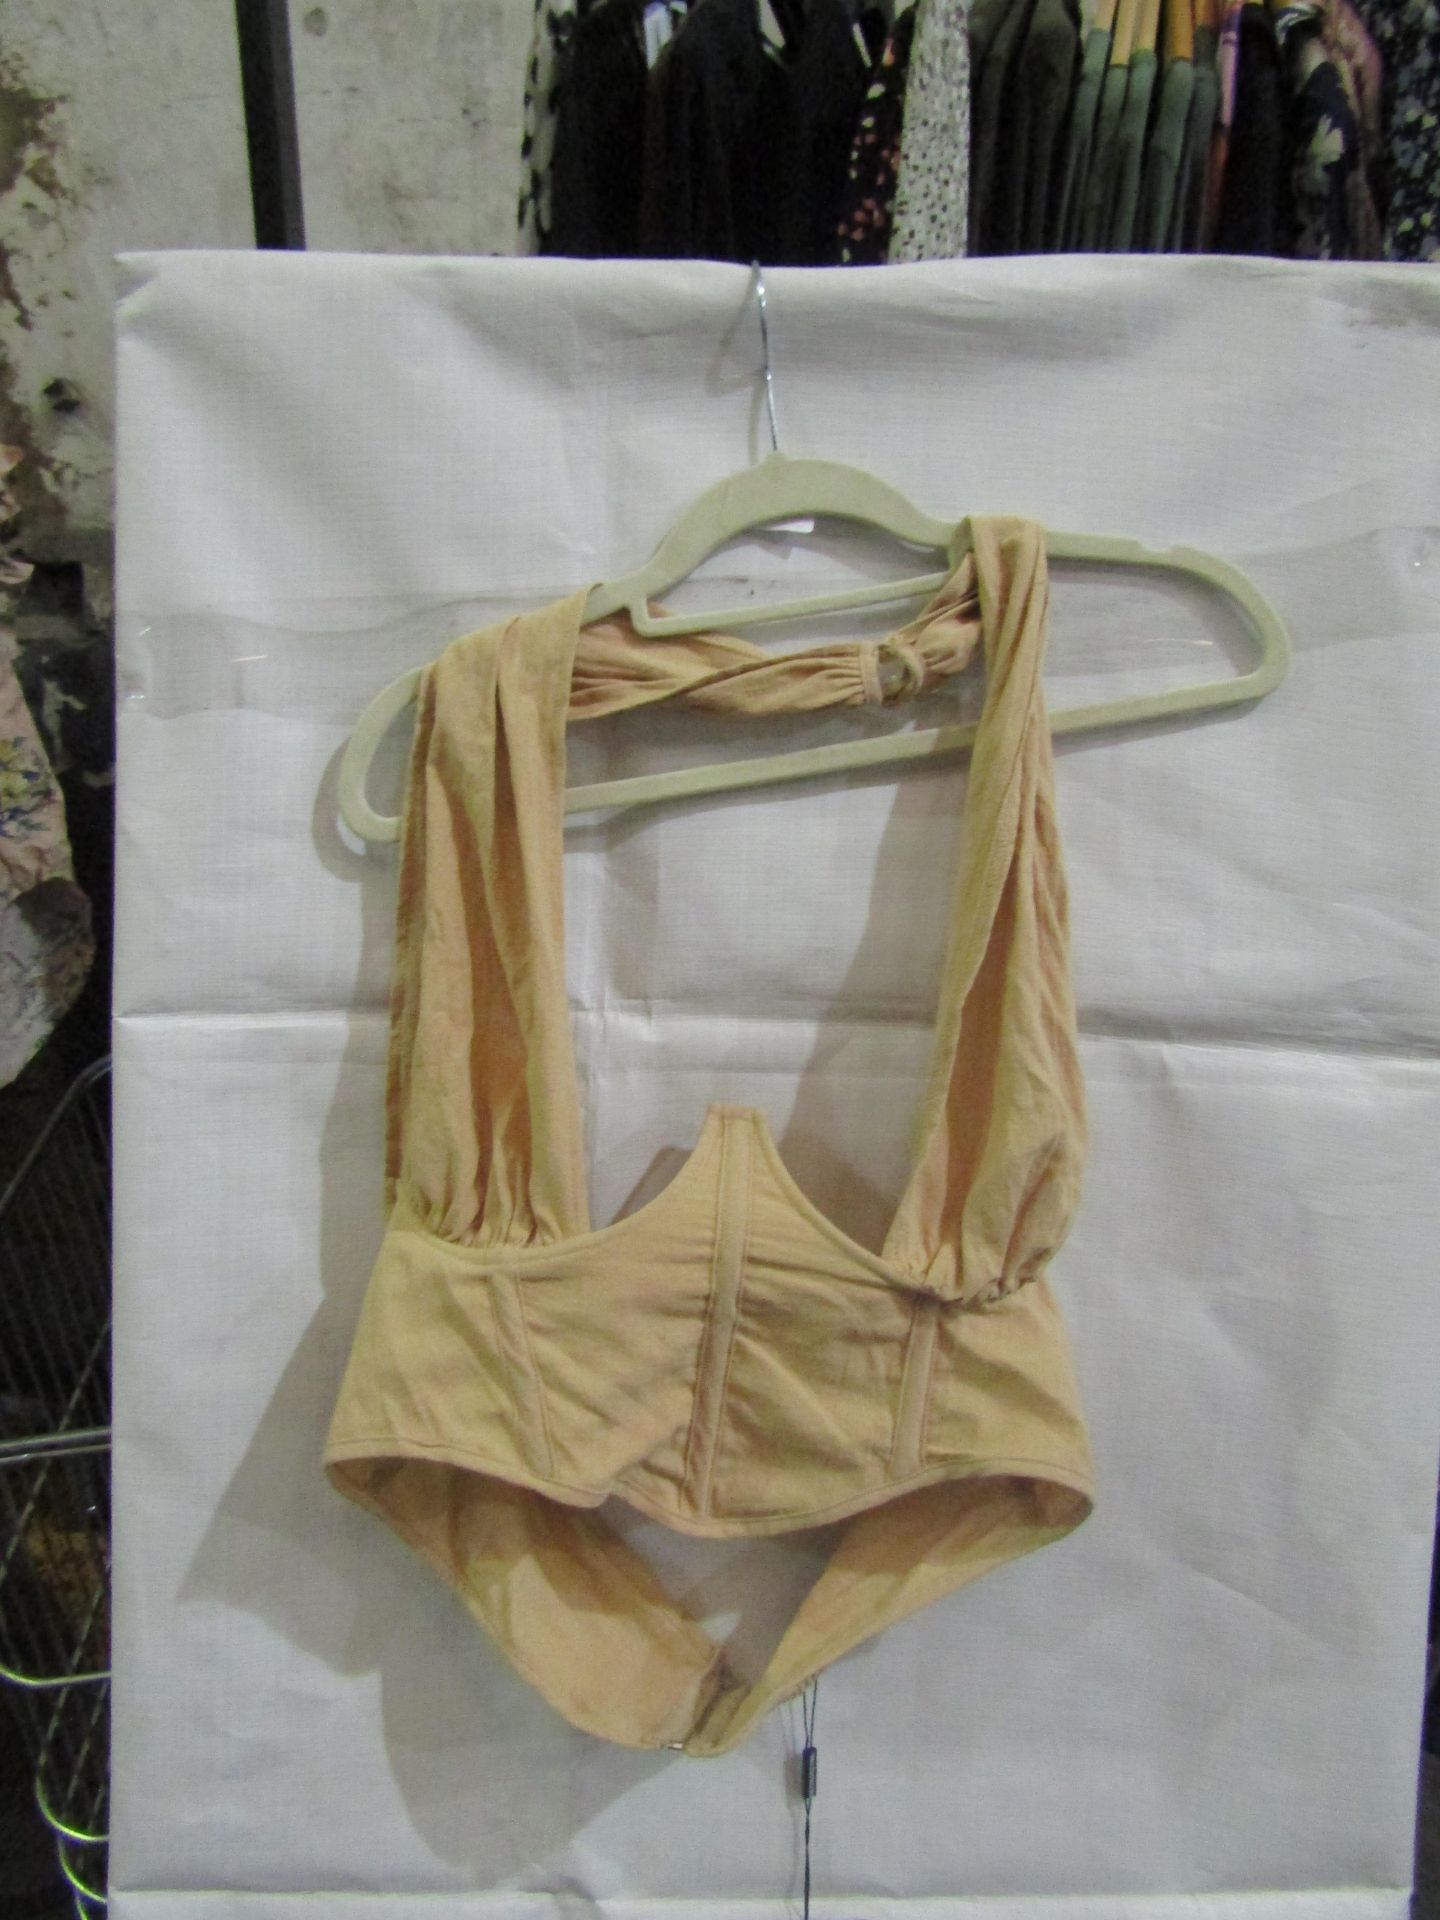 4x Pretty Little Thing Oatmeal Linen Look Cross Front Corset- Size 8, New & Packaged.